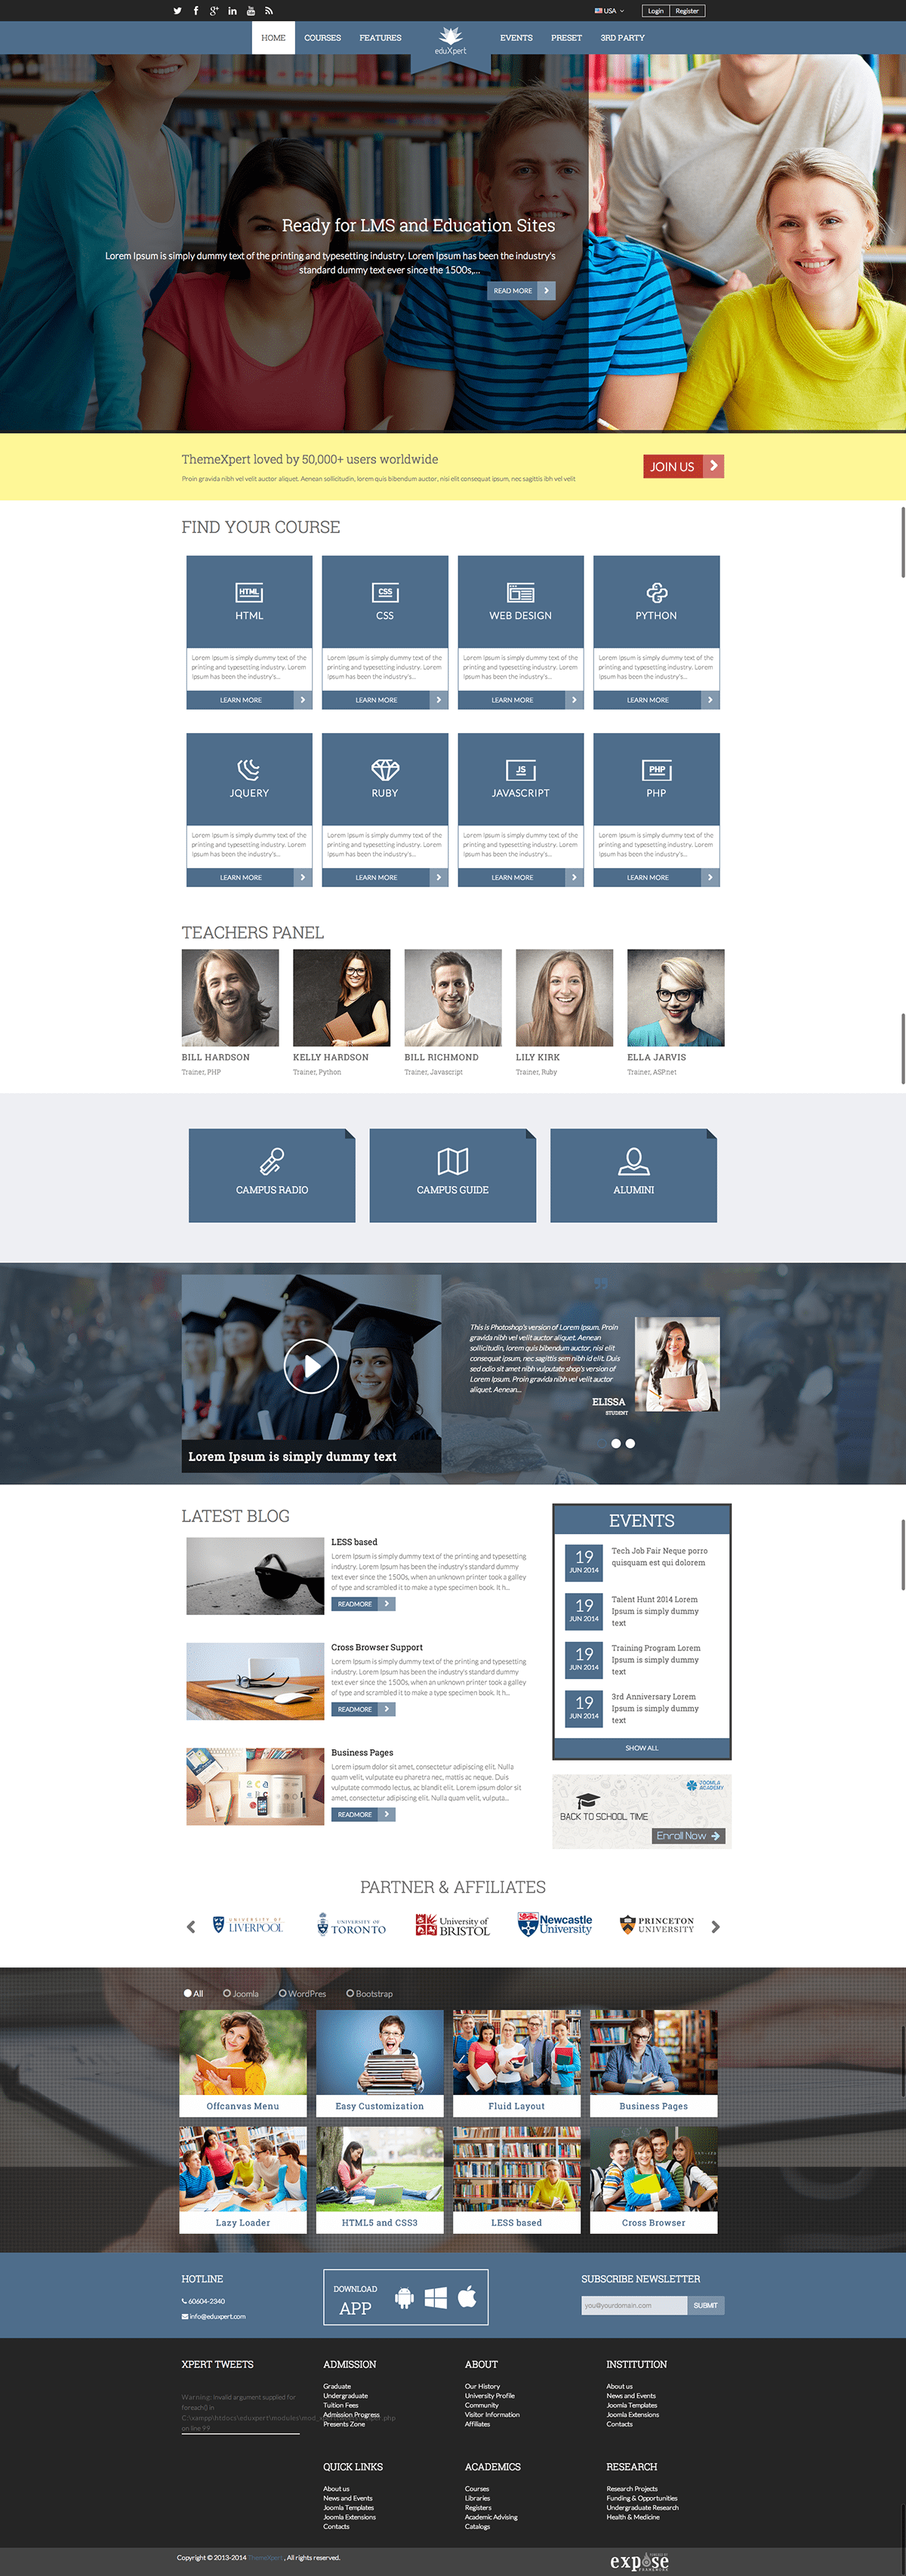 Education Template